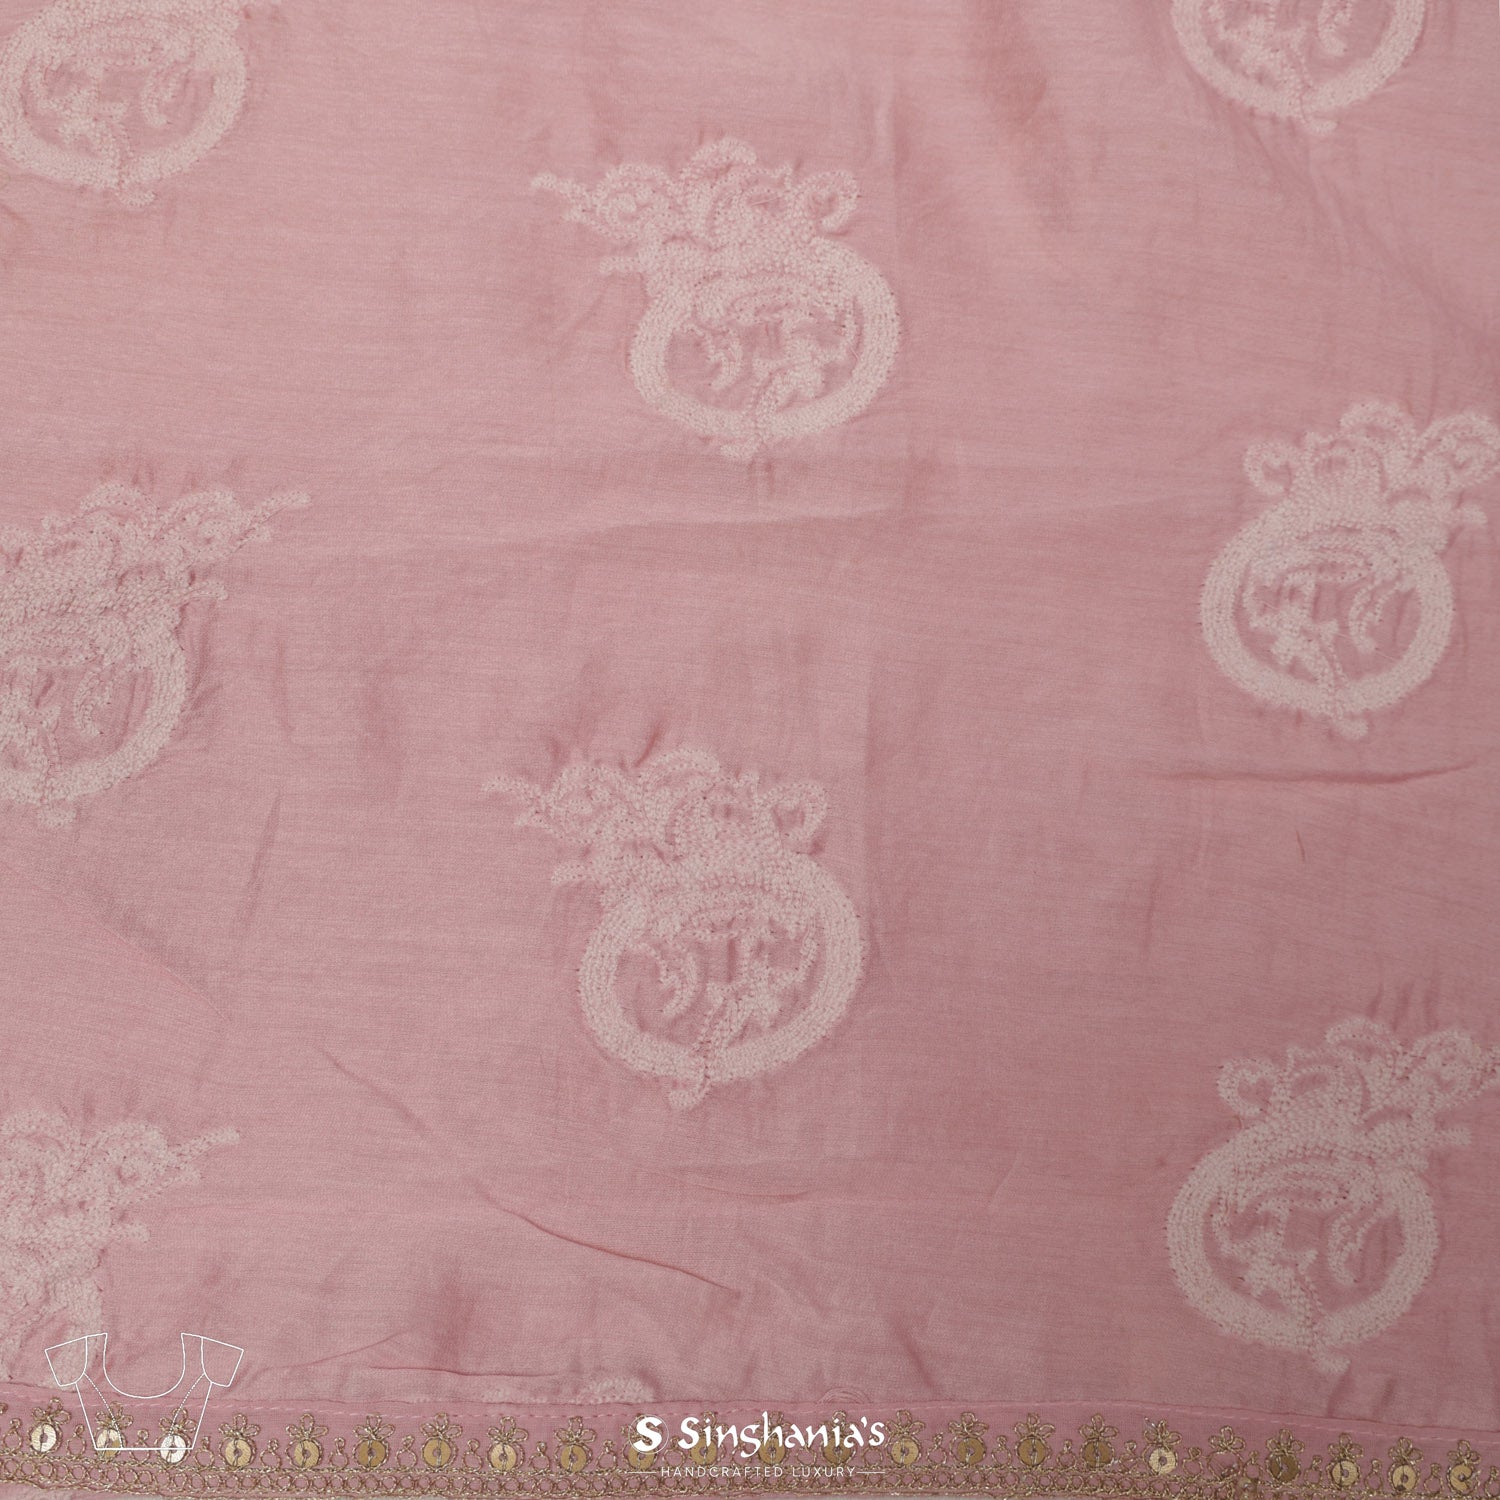 Cotton Candy Pink Organza Saree With Floral Thread Embroidery